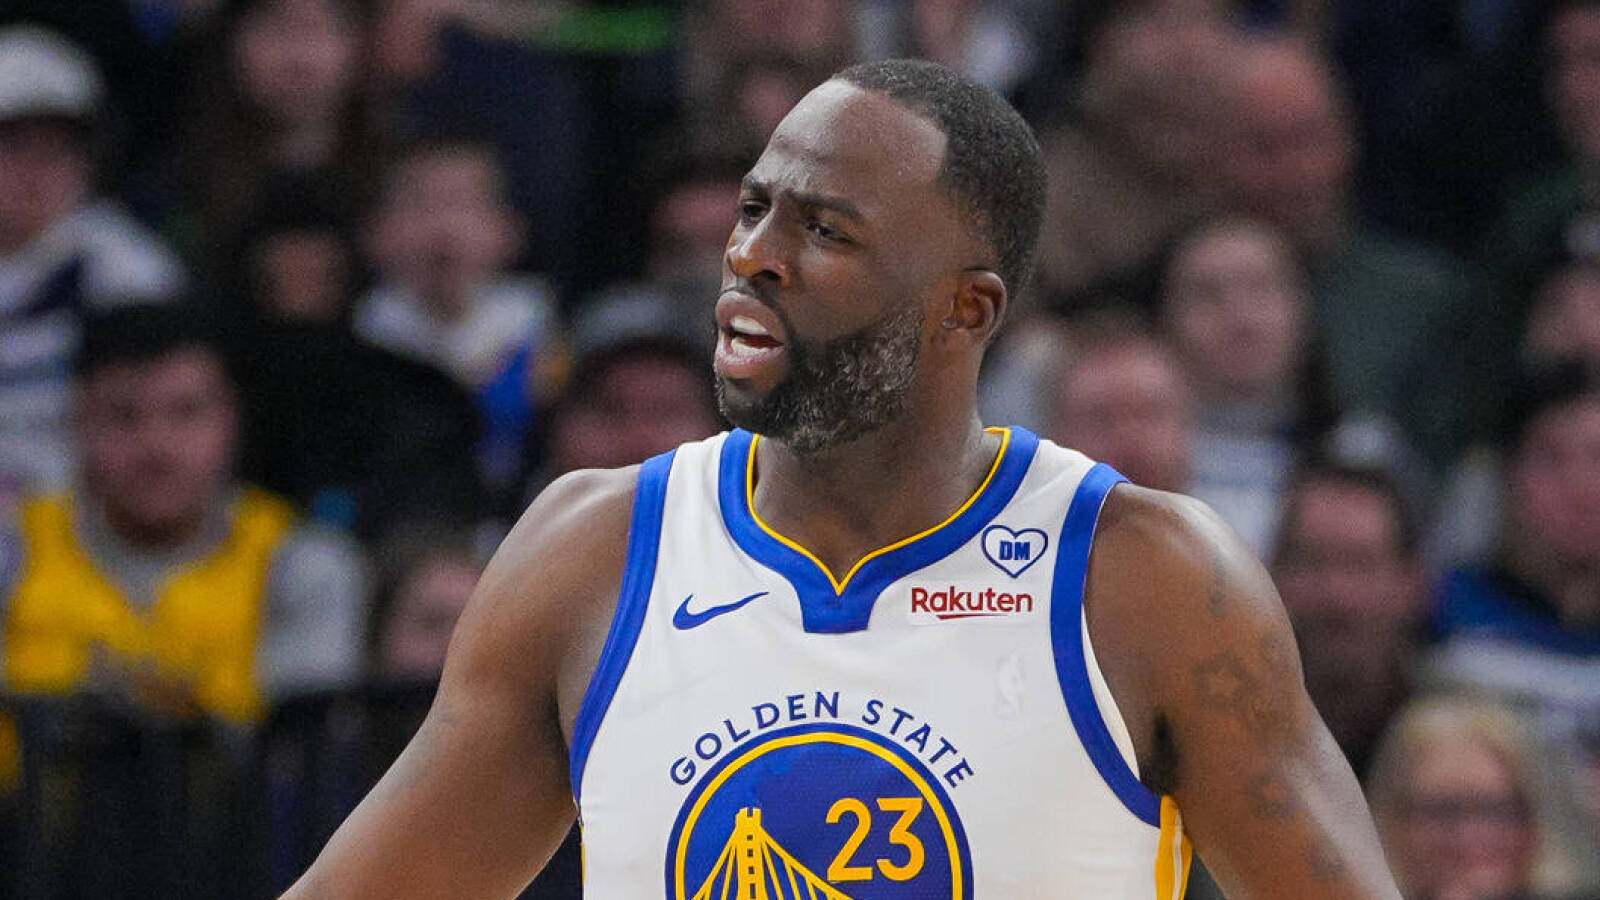 Draymond Green grabs Patty Mills by the throat in dangerous-looking play